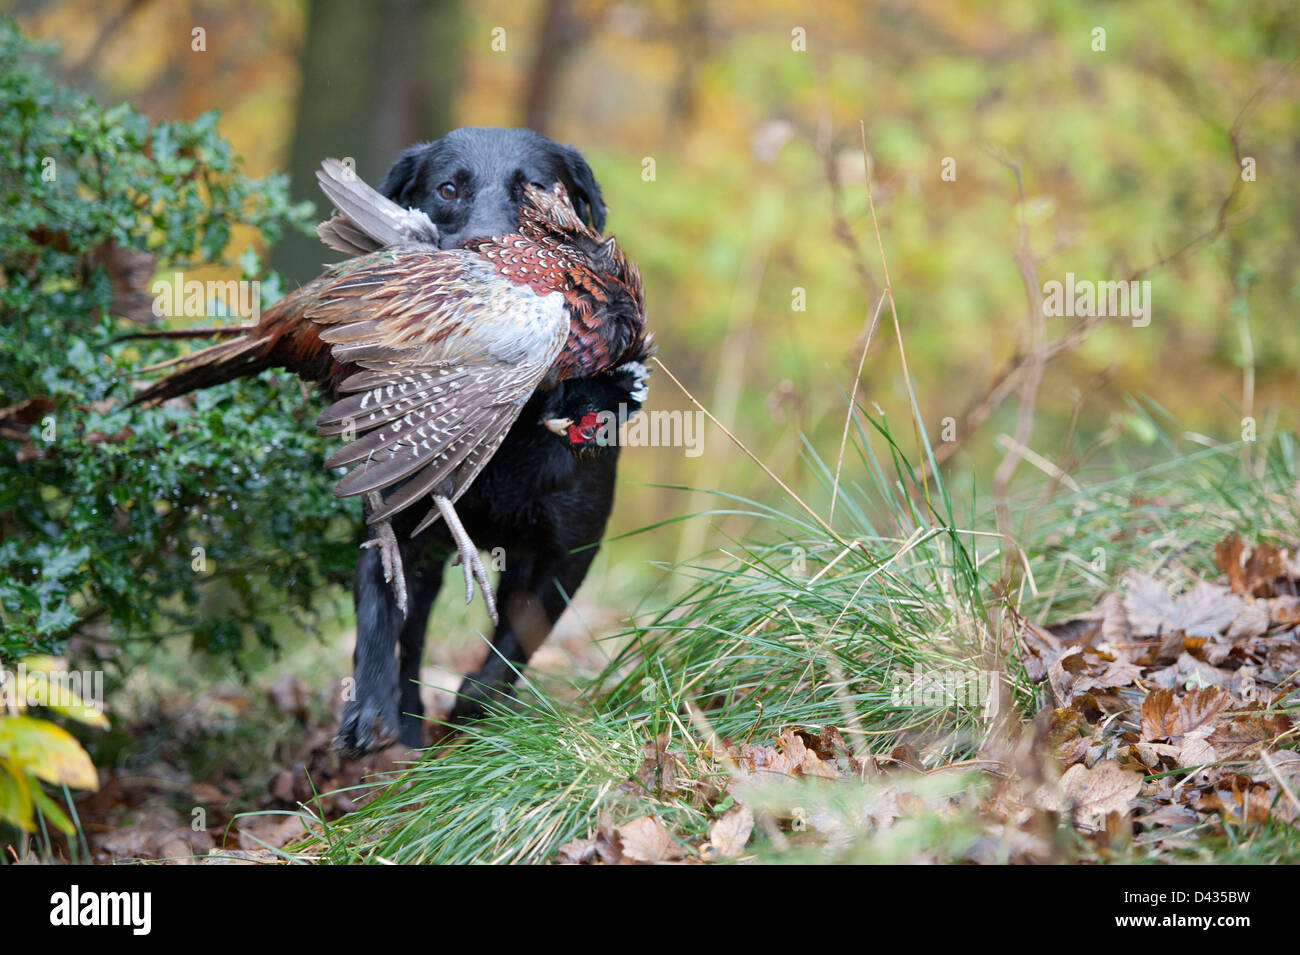 Gun duck with Pheasant running towards camera in the woods in Autumn Stock Photo